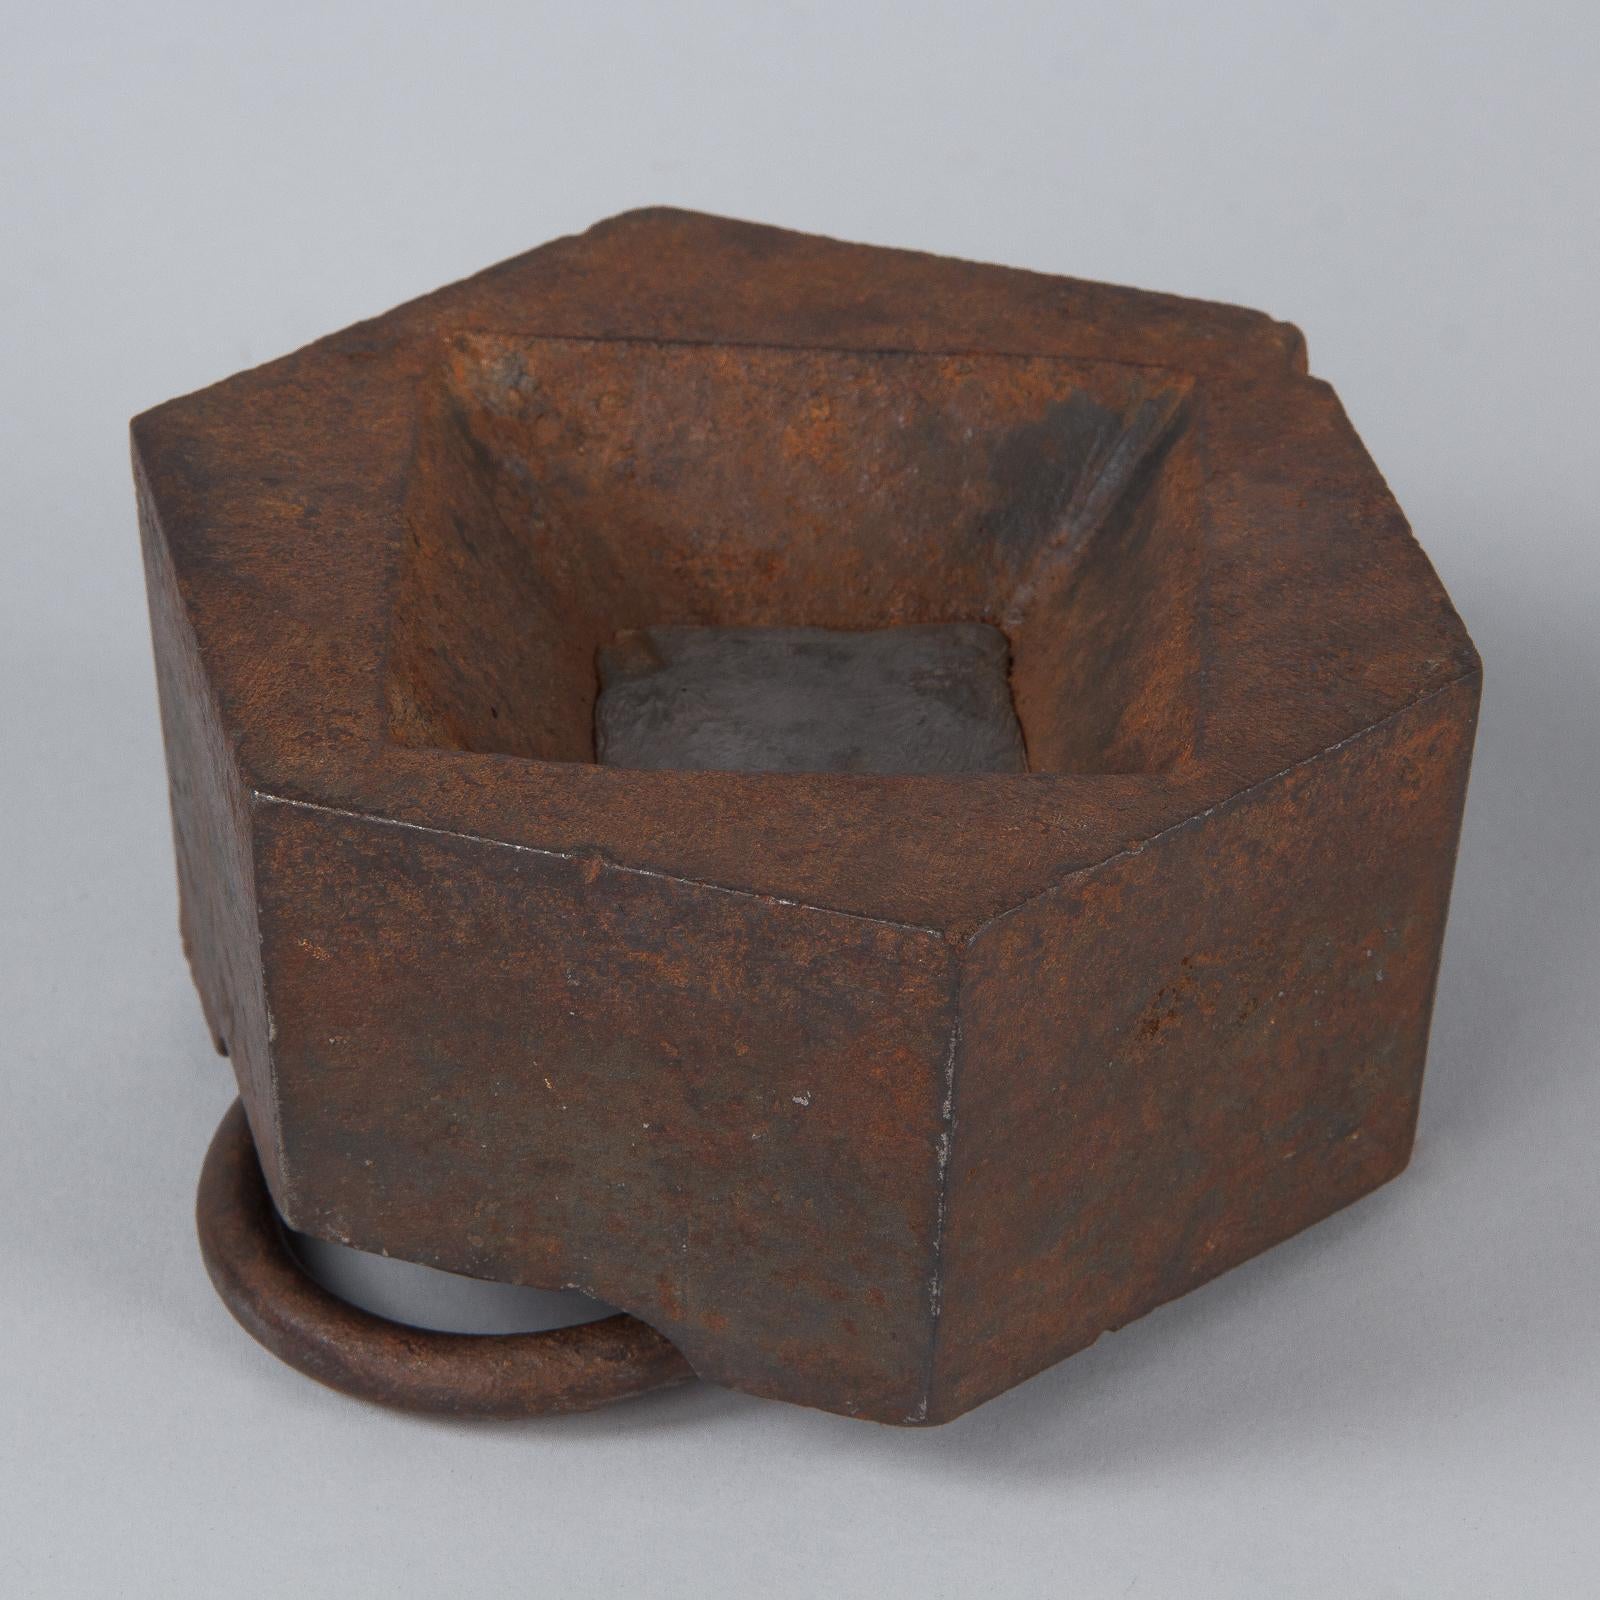 5 Kilogram Iron Scale Weight, France, Early 1900s 4